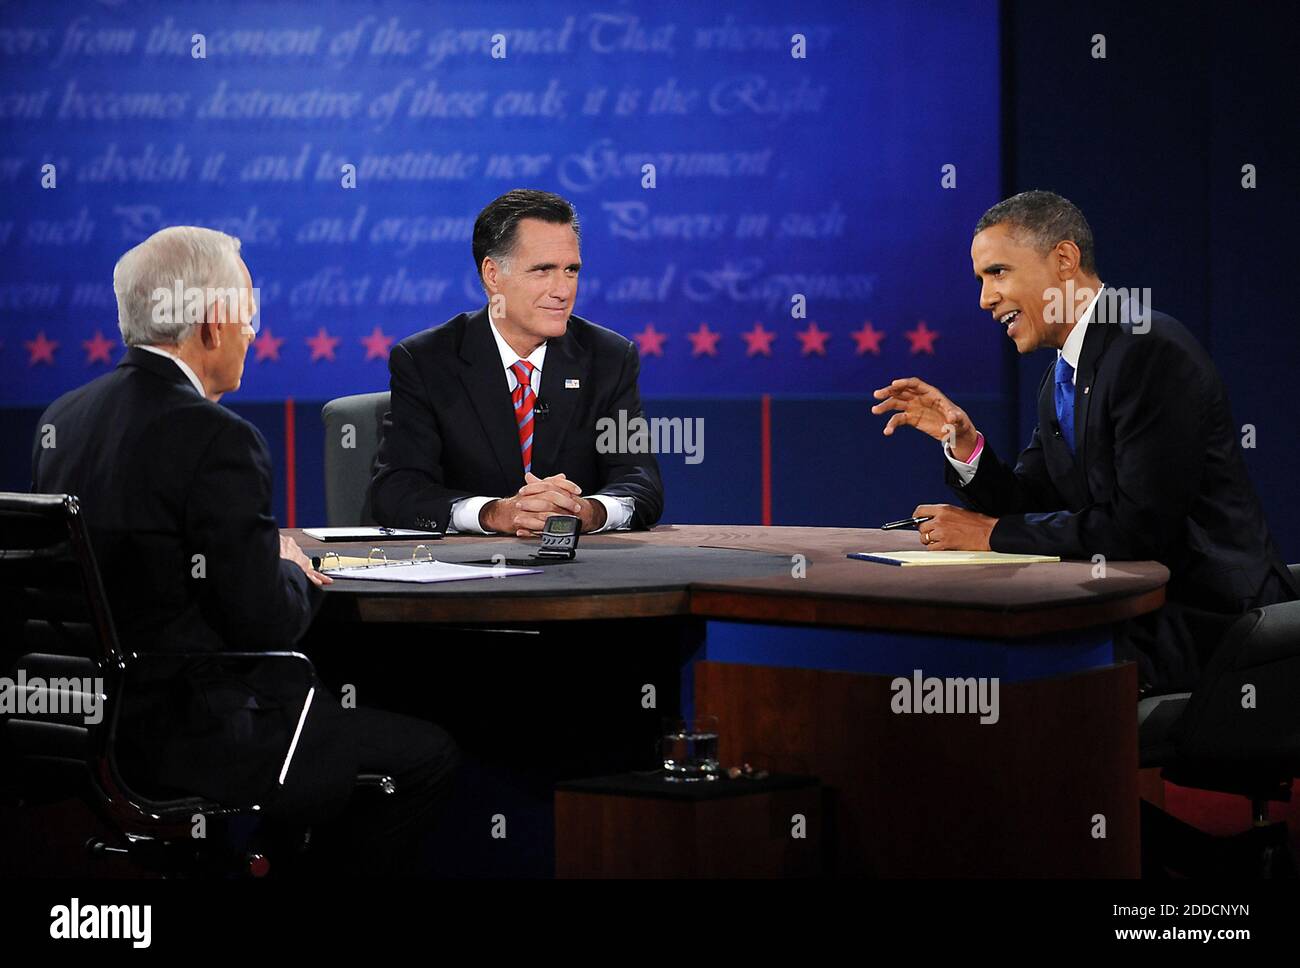 NO FILM, NO VIDEO, NO TV, NO DOCUMENTARY - Republican presidential candidate Mitt Romney listens as President Barack Obama makes a point during the final presidential debate at Lynn University in Boca Raton, Florida, USA, on Monday, October 22, 2012. Bob Schieffer was the moderator. Photo by Robert Duyos/Sun Sentinel/MCT/ABACAPRESS.COM Stock Photo